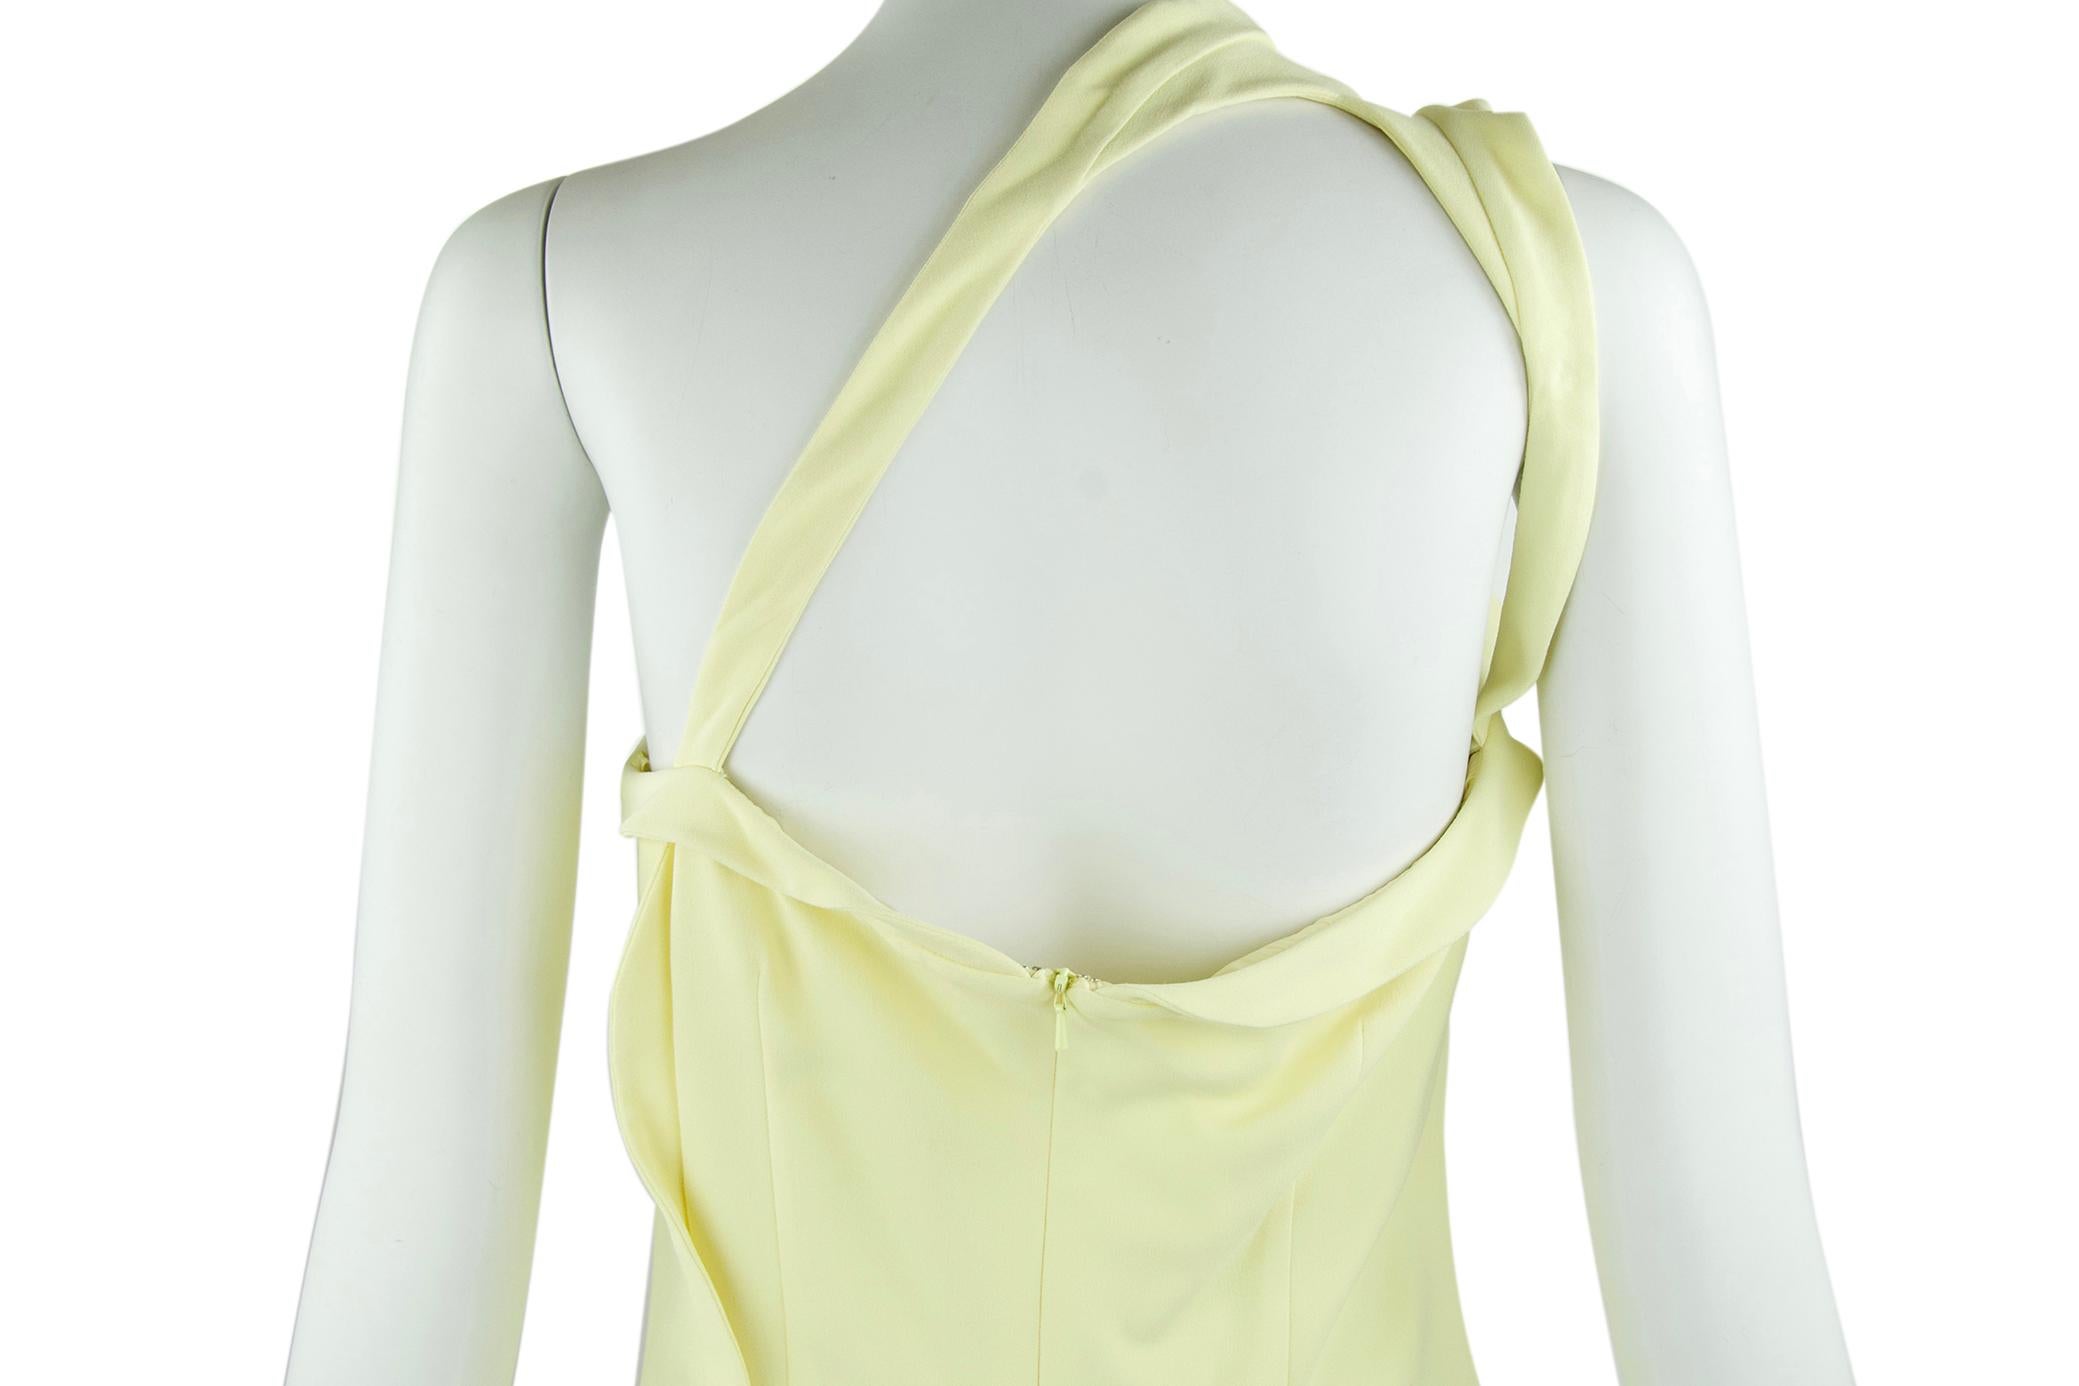 Modern and sleek, this Cushnie et Ochs dress is perfect for a spring/summer cocktail party or soiree.  A beautiful light yellow color with a one shoulder strap and slit.  Features ruffle detail.

Size: US 6

Condition: Pristine, likely never